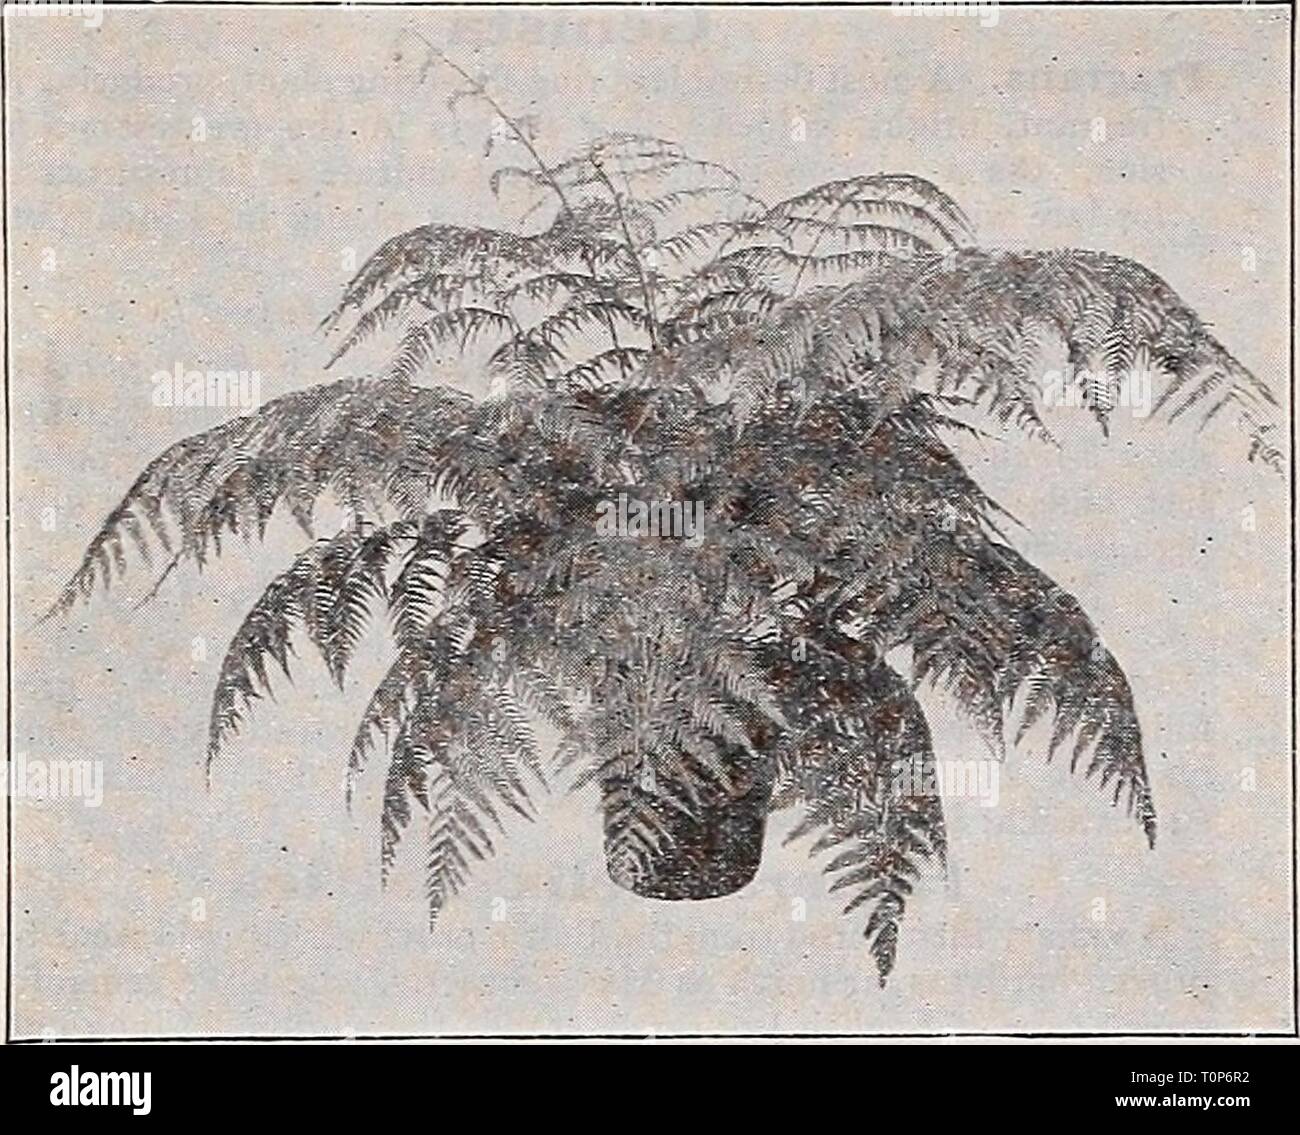 Dreer's autumn catalogue (1933) Dreer's autumn catalogue  dreersautumncata1933henr Year: 1933  ^^ Select Flowering and Decorative Plants for House and Conservatory    ClBOIICJI SCHIEDEI (Mexican Tree Fern) Asplenium Nidus Avis (Bird's Nest Fern) We have a splendid lot of this interesting Fern which is well suited for house culture. 2j- inch pots, 35 cts.; 3§-inch pots, 75 cts. each. Cibotium Schiedei (Mexican Tree Fern) One of the most desirable and valuable Ferns for room decora- tion. 4-inch pots, §1.00; 6-inch pots, S2.50; 8-inch pots, S5.00. Specimen Plants in iO-inch tubs, S7.50 each. Pla Stock Photo